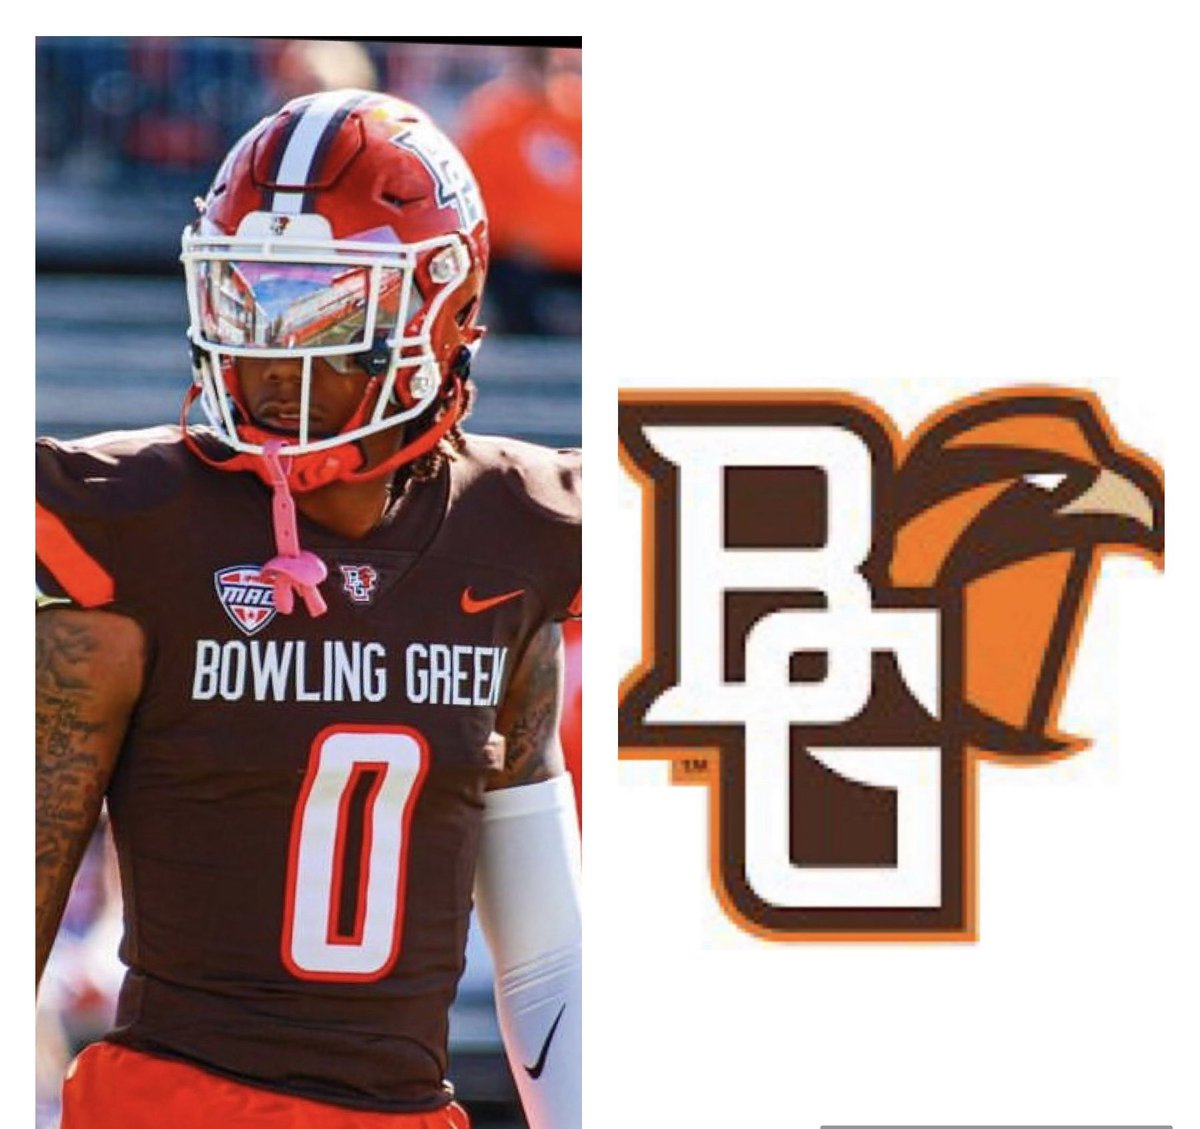 After a great 6:00 am workout. I am truly blessed to receive my First Division 1 offer to Bowling Green University ! I can’t wait to get on campus! @coachbwhite7 @gambo3241